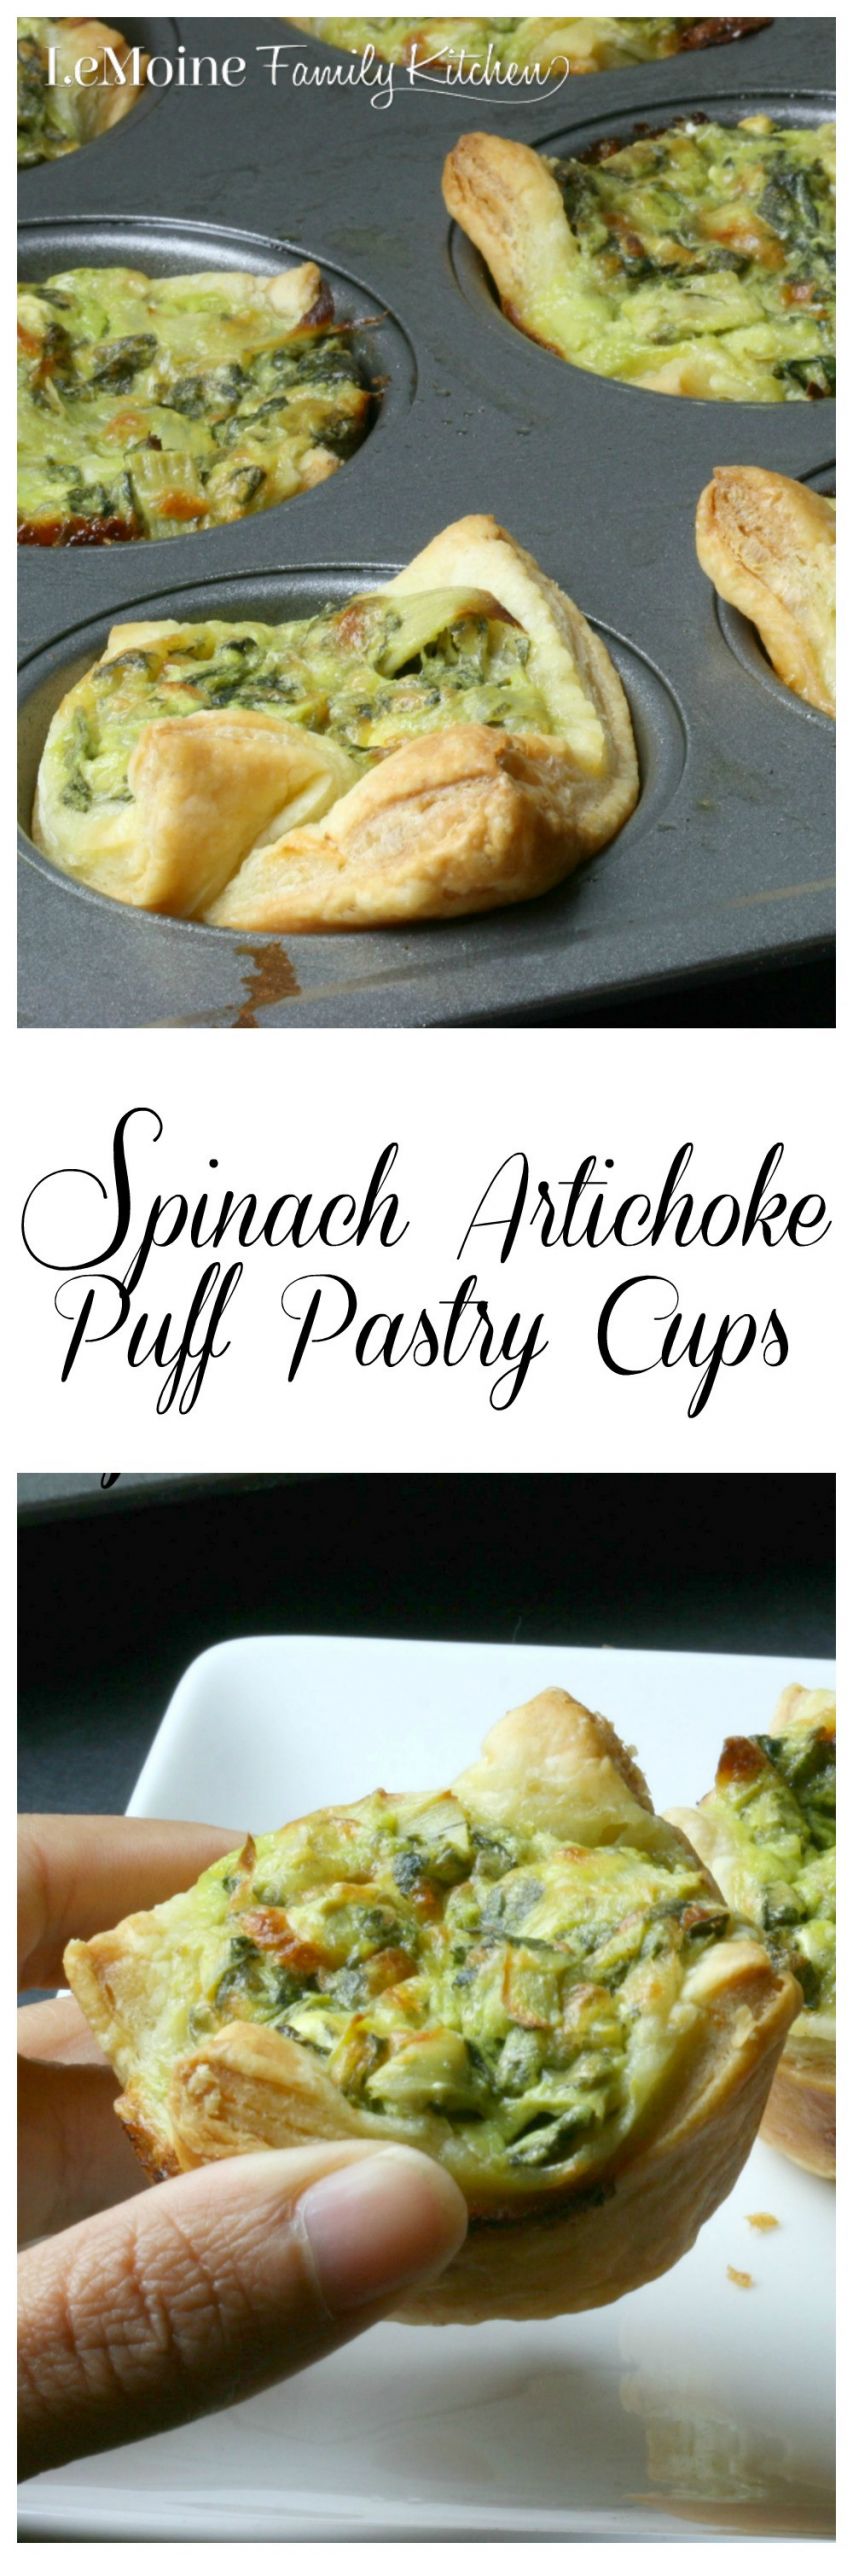 Puff Pastry Appetizers
 Spinach Artichoke Puff Pastry Cups LeMoine Family Kitchen